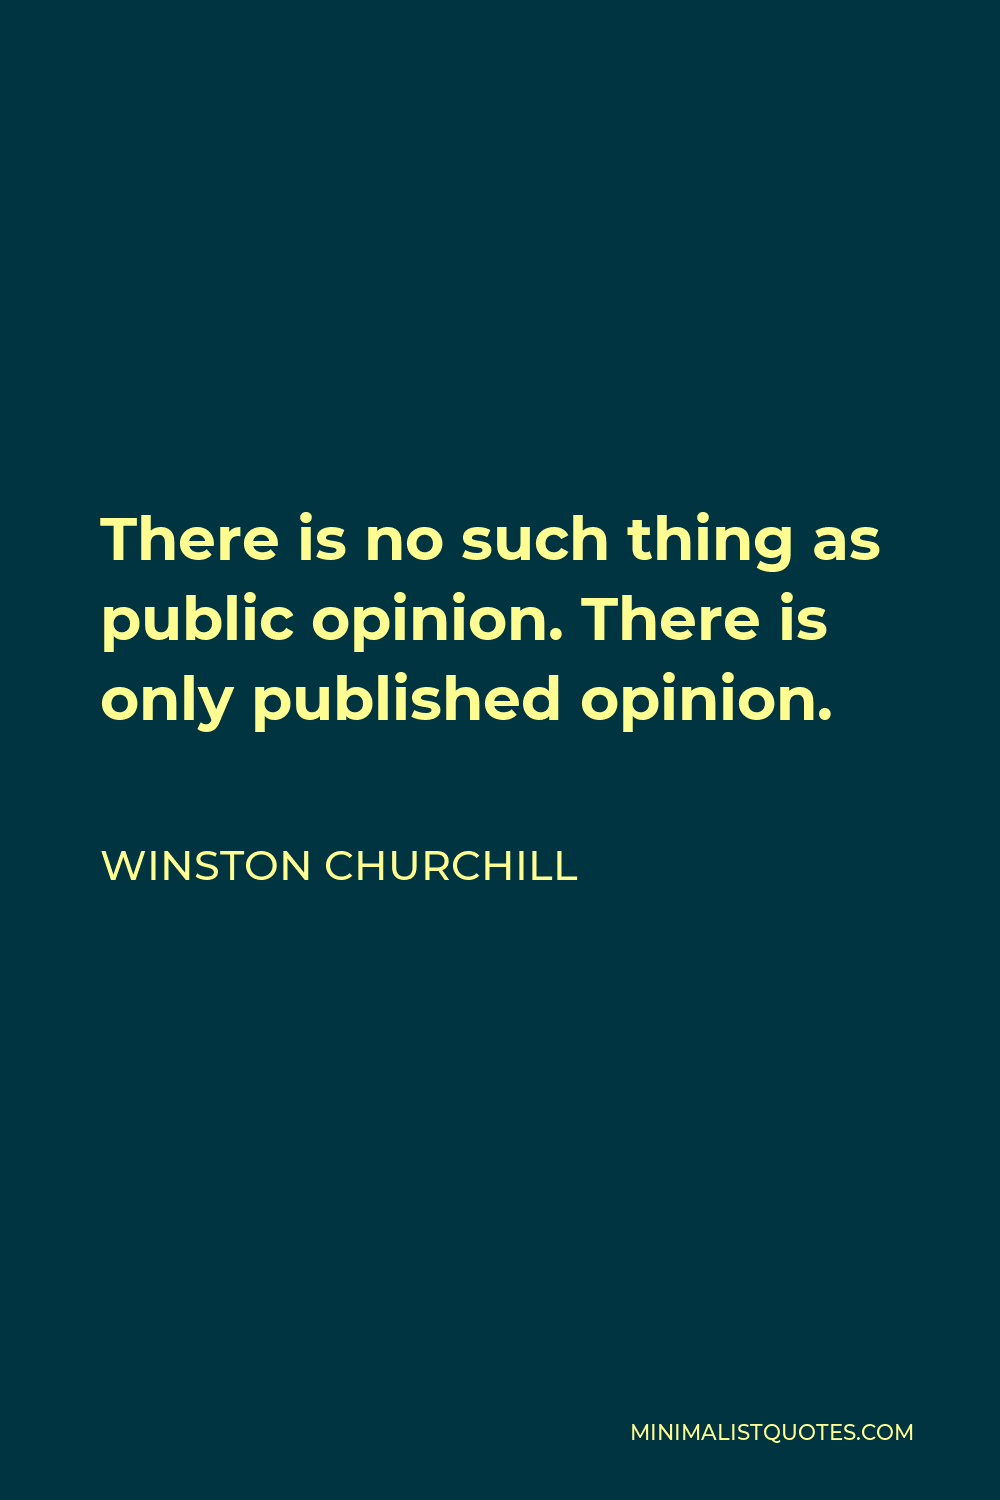 Winston Churchill Quote - There is no such thing as public opinion. There is only published opinion.